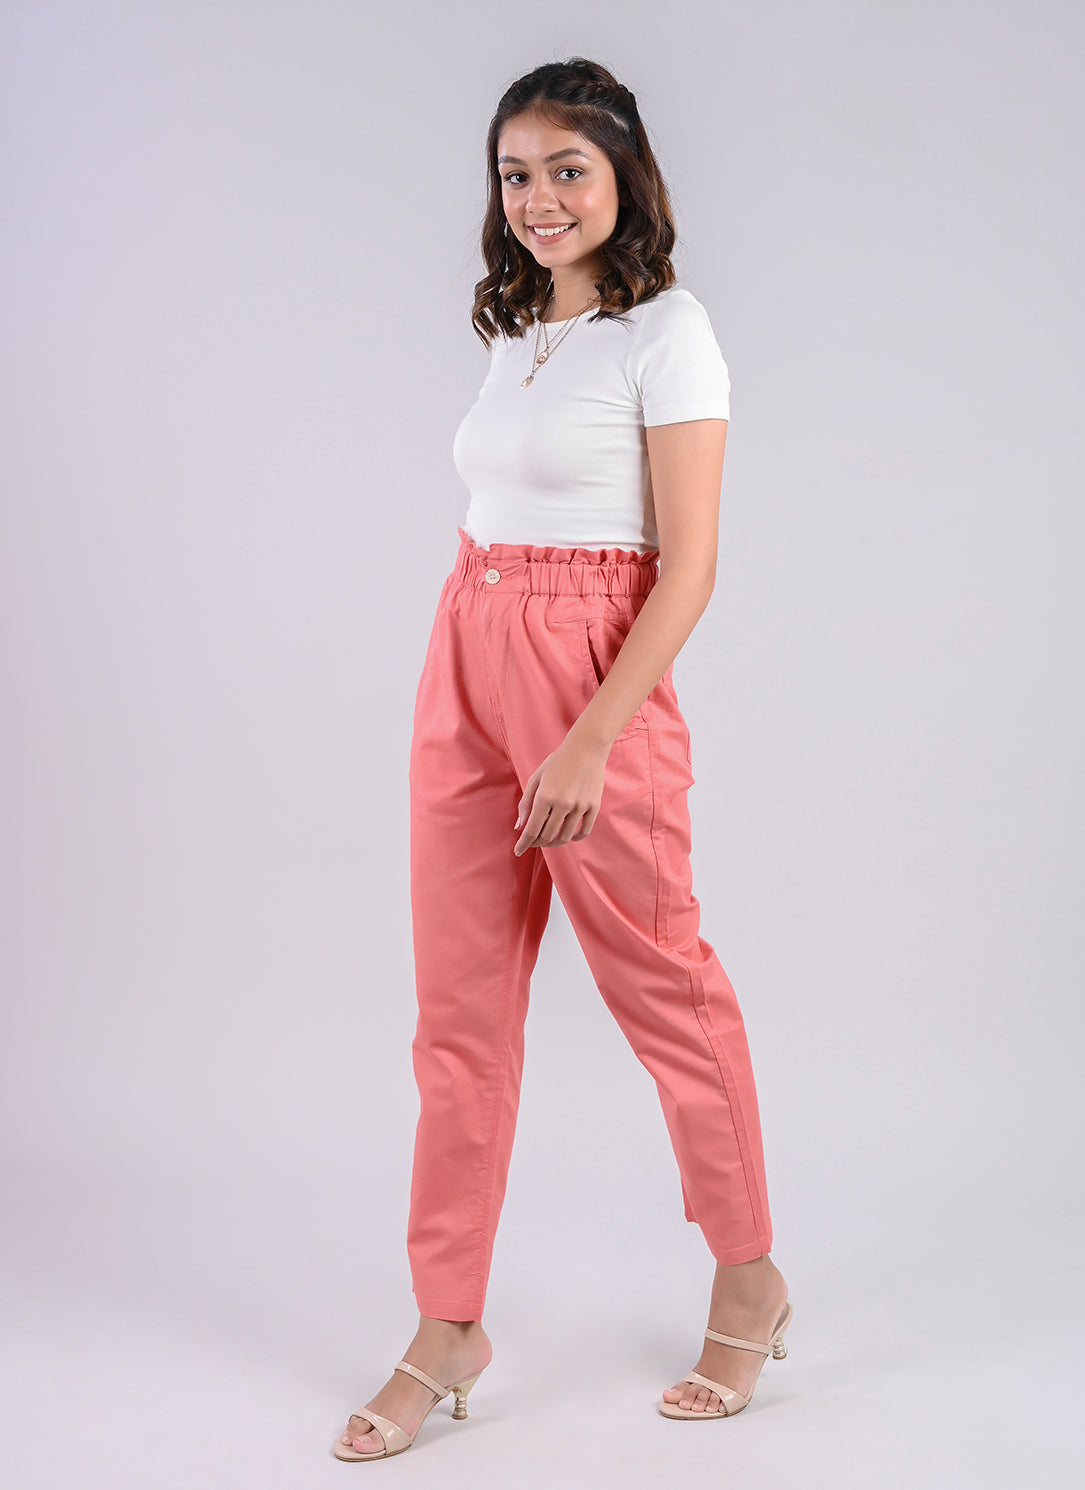 Faballey Bottoms Pants and Trousers  Buy Faballey Purple Belted Formal Pant  Online  Nykaa Fashion